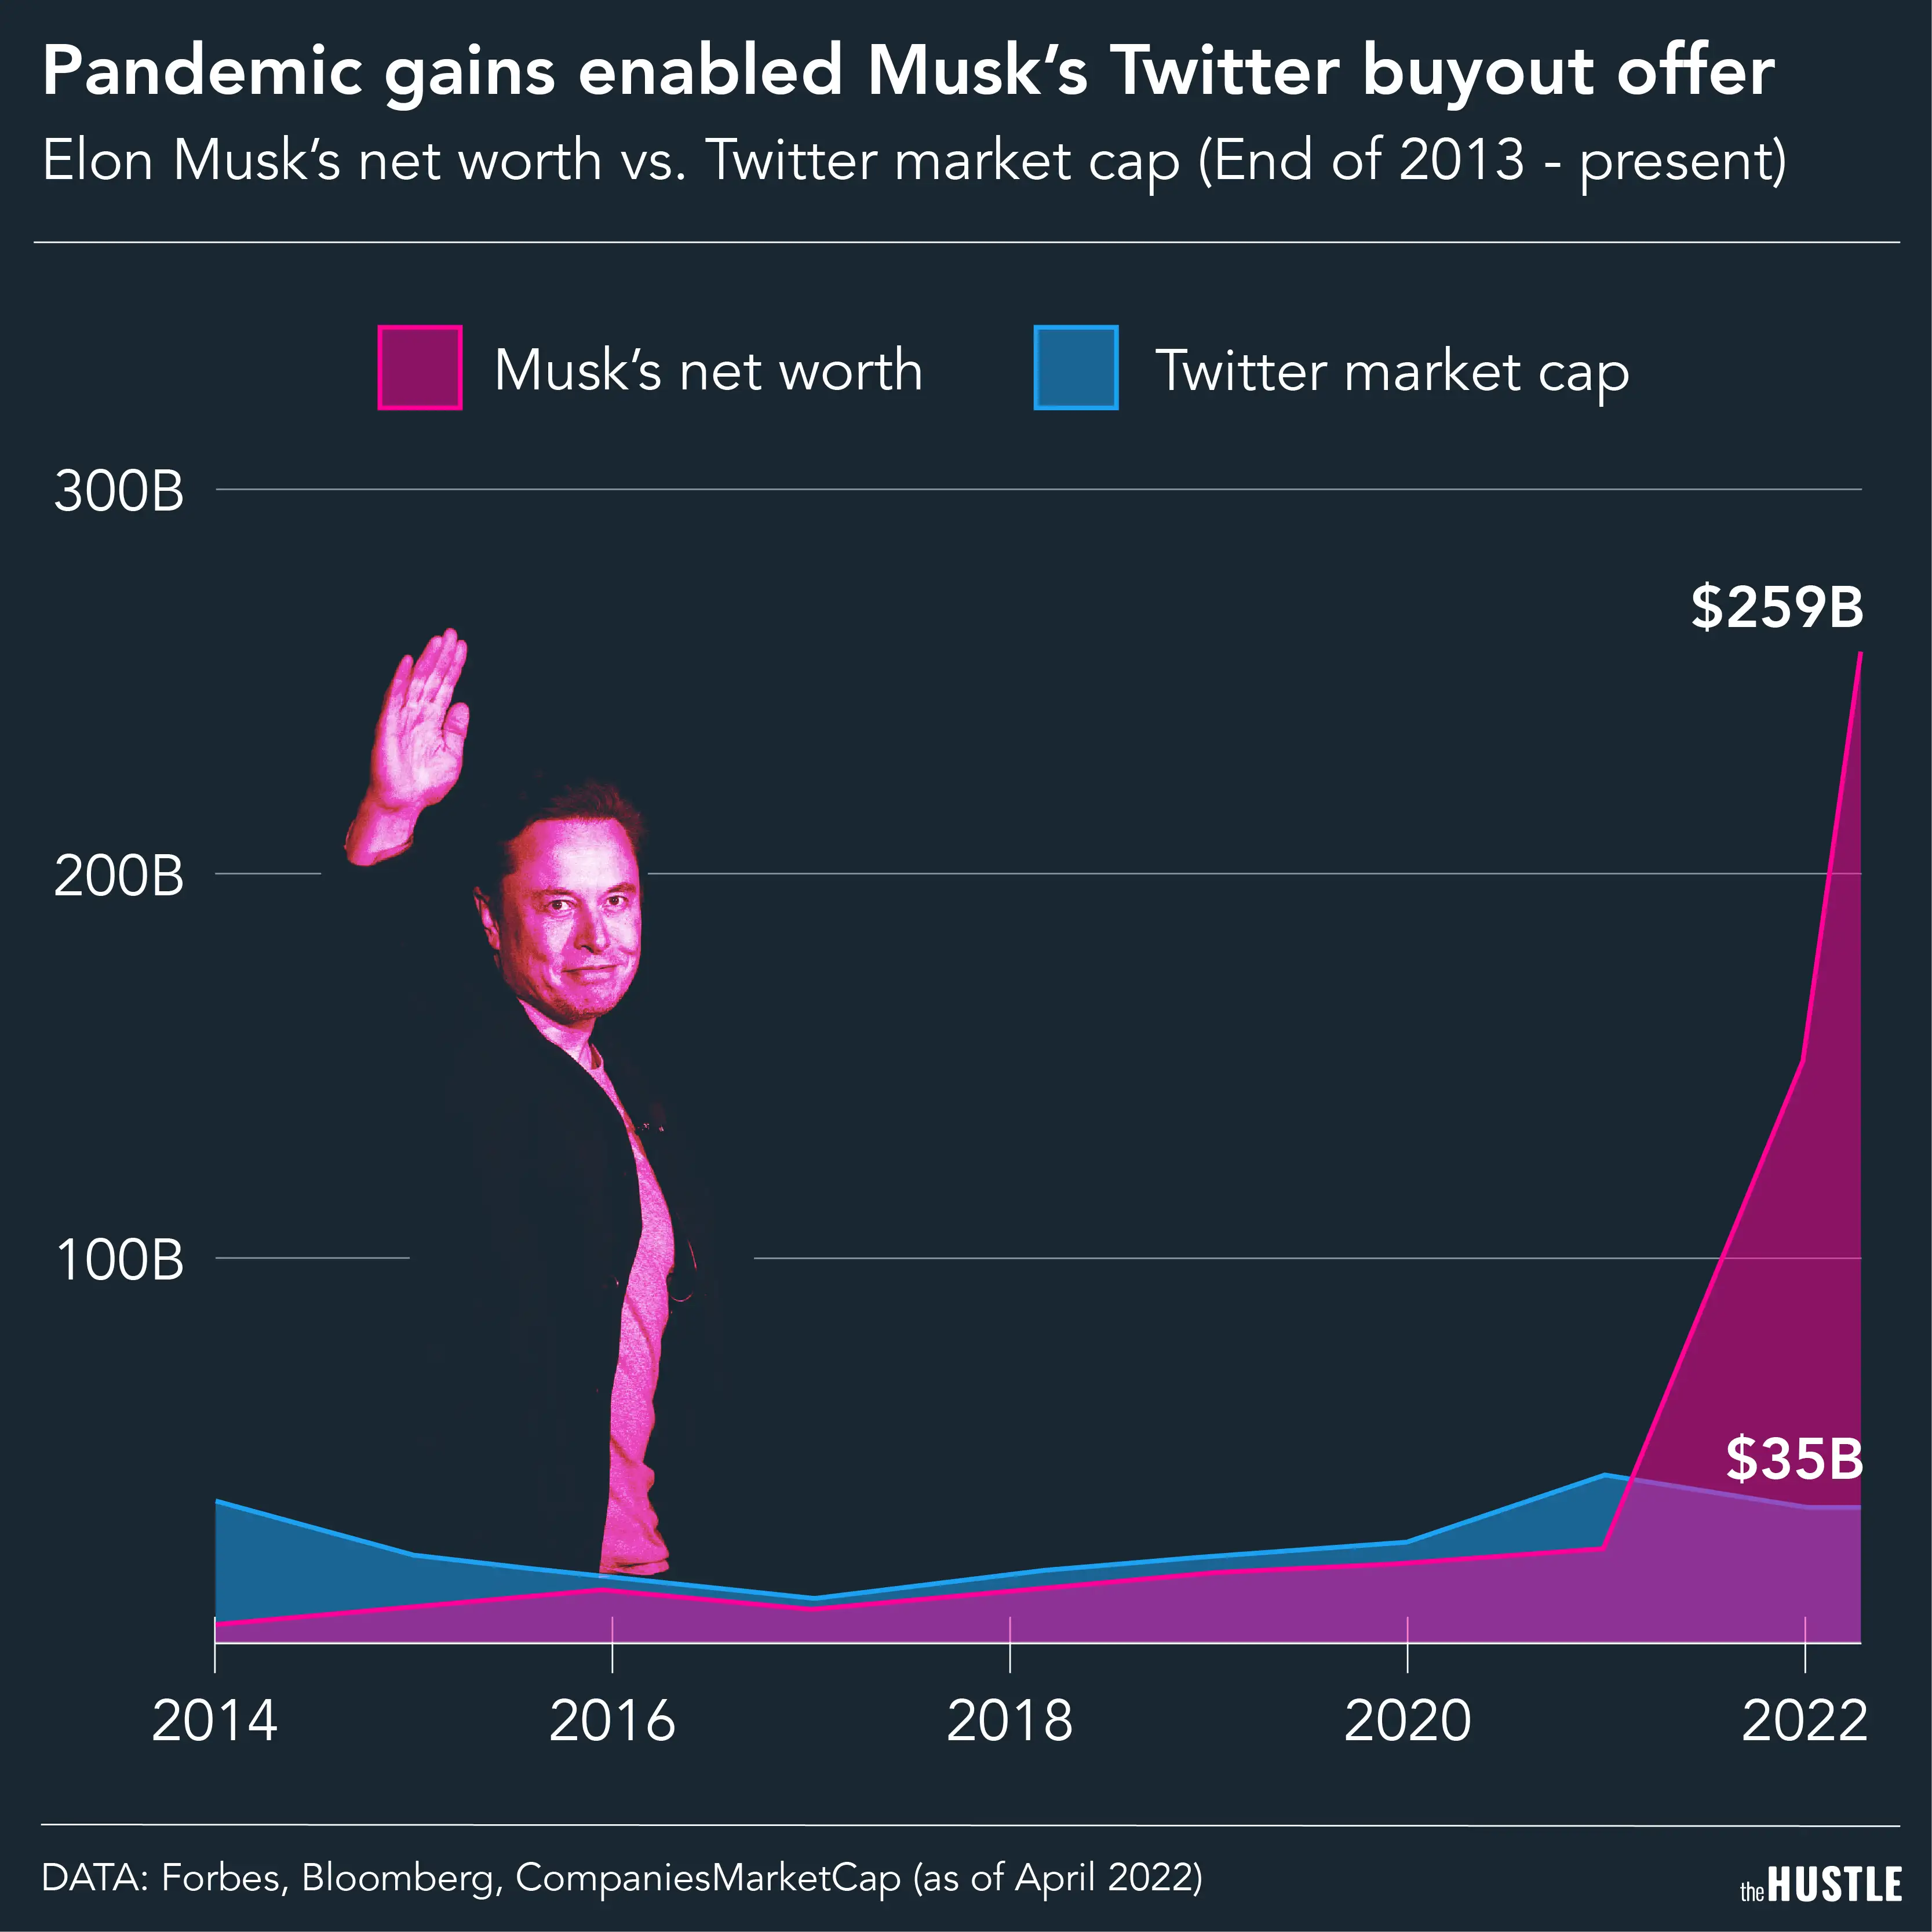 Elon Musk just offered to buy Twitter. Why?